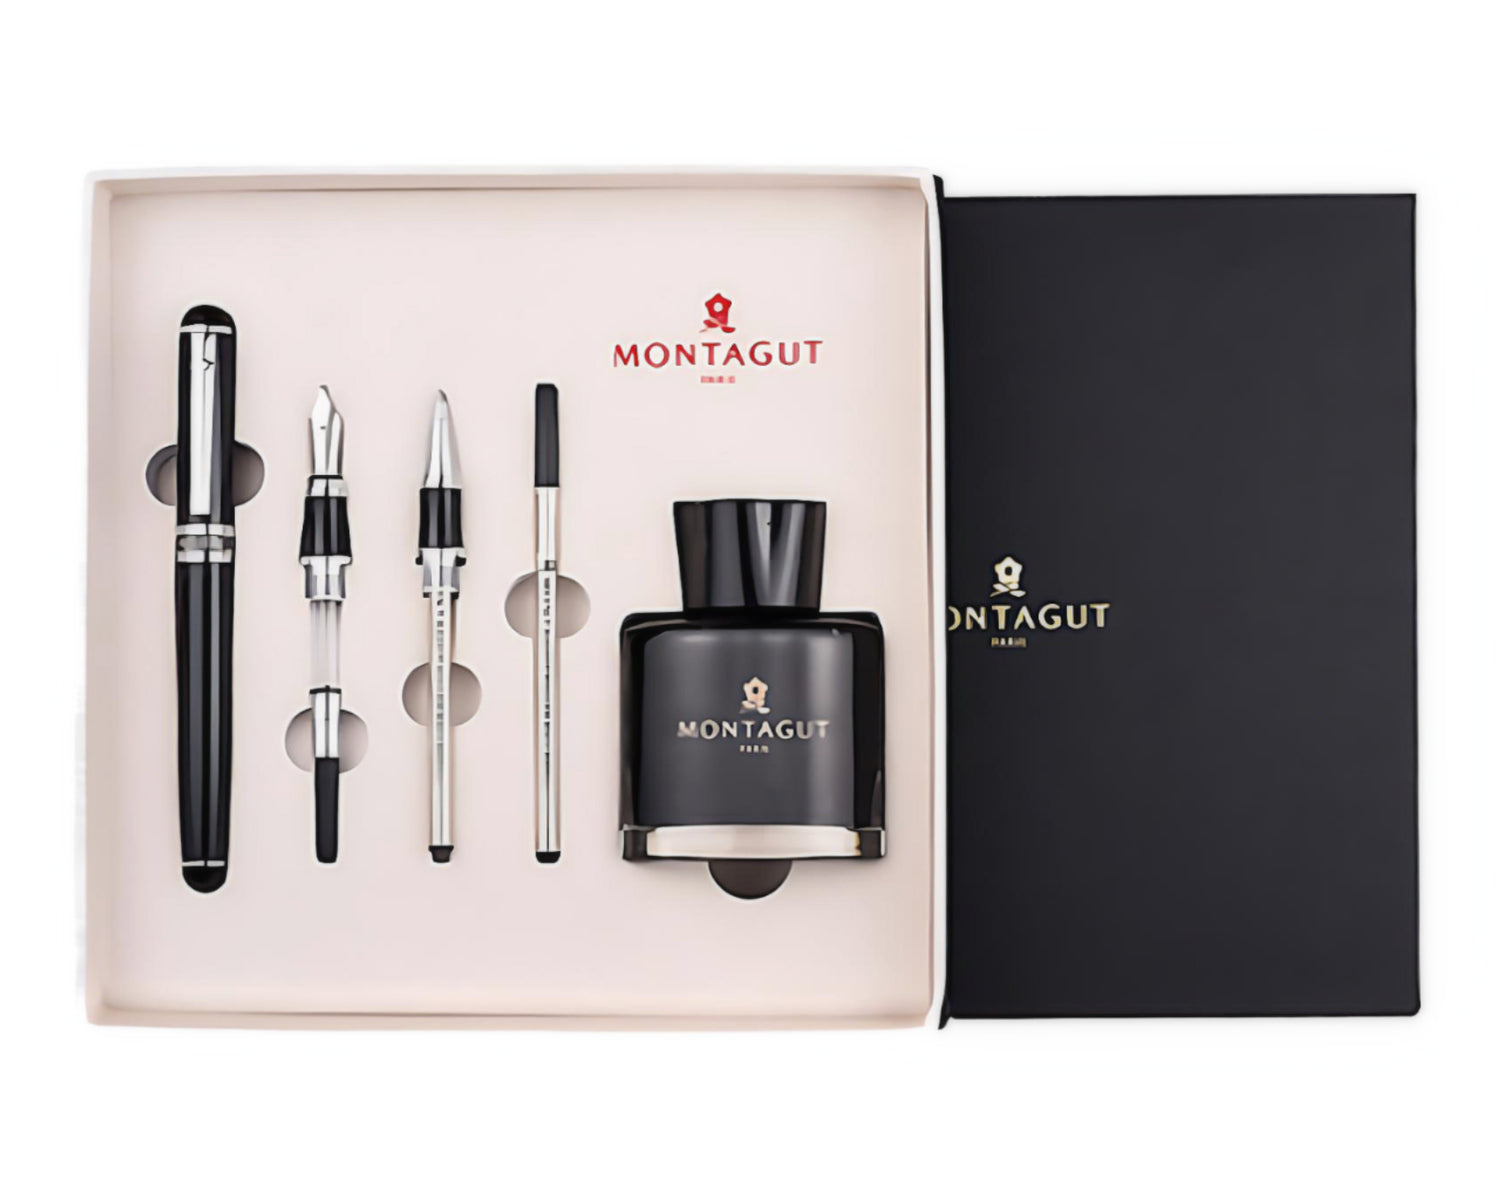 a Montagut Fountain Pen set in silver and black